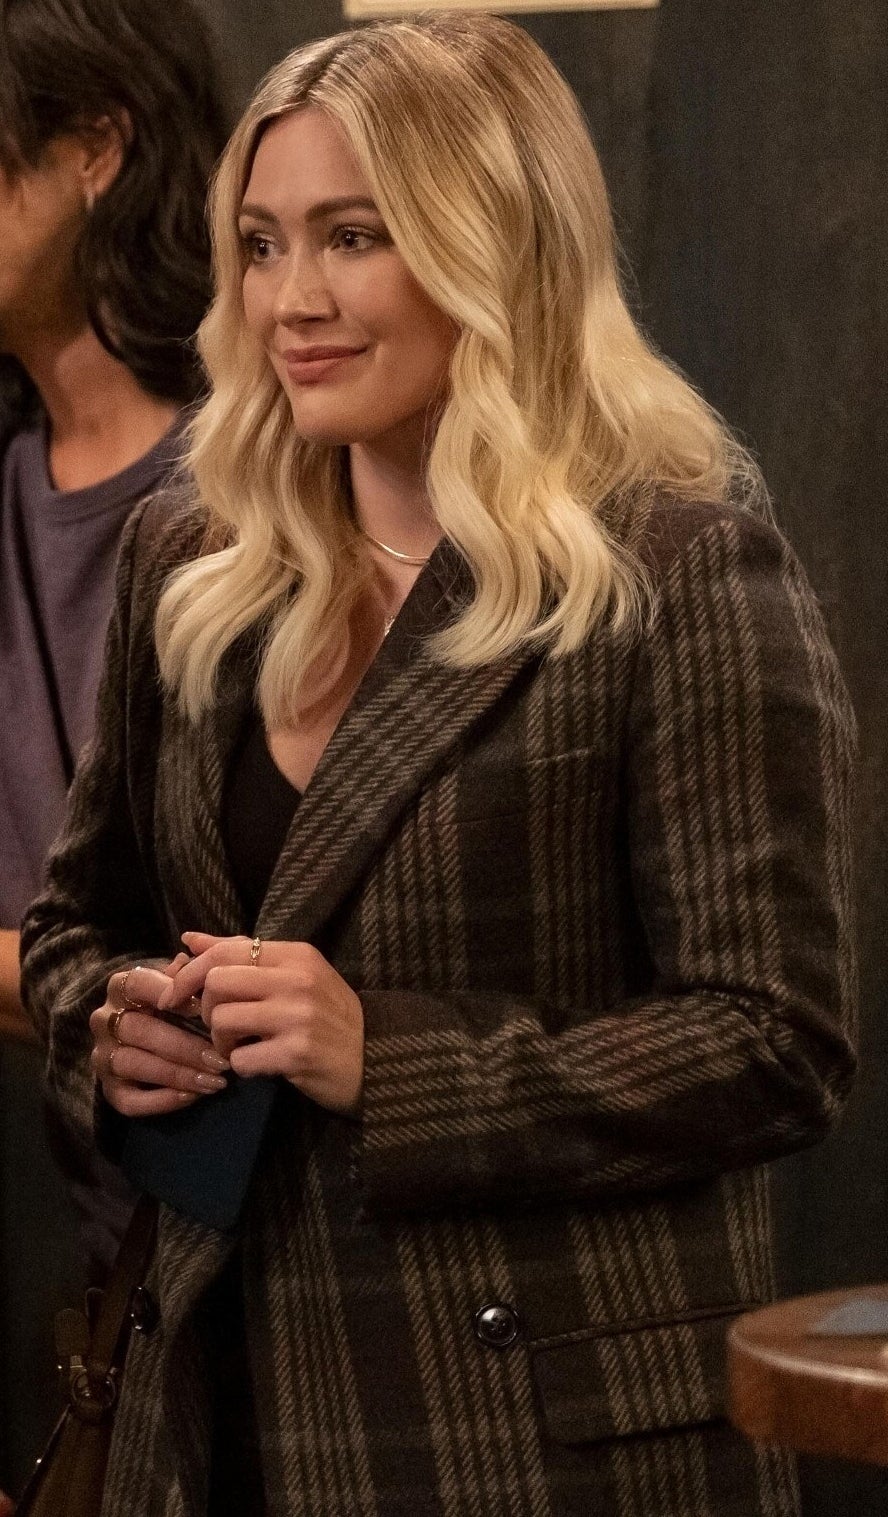 Hilary Duff in How I Met Your Father